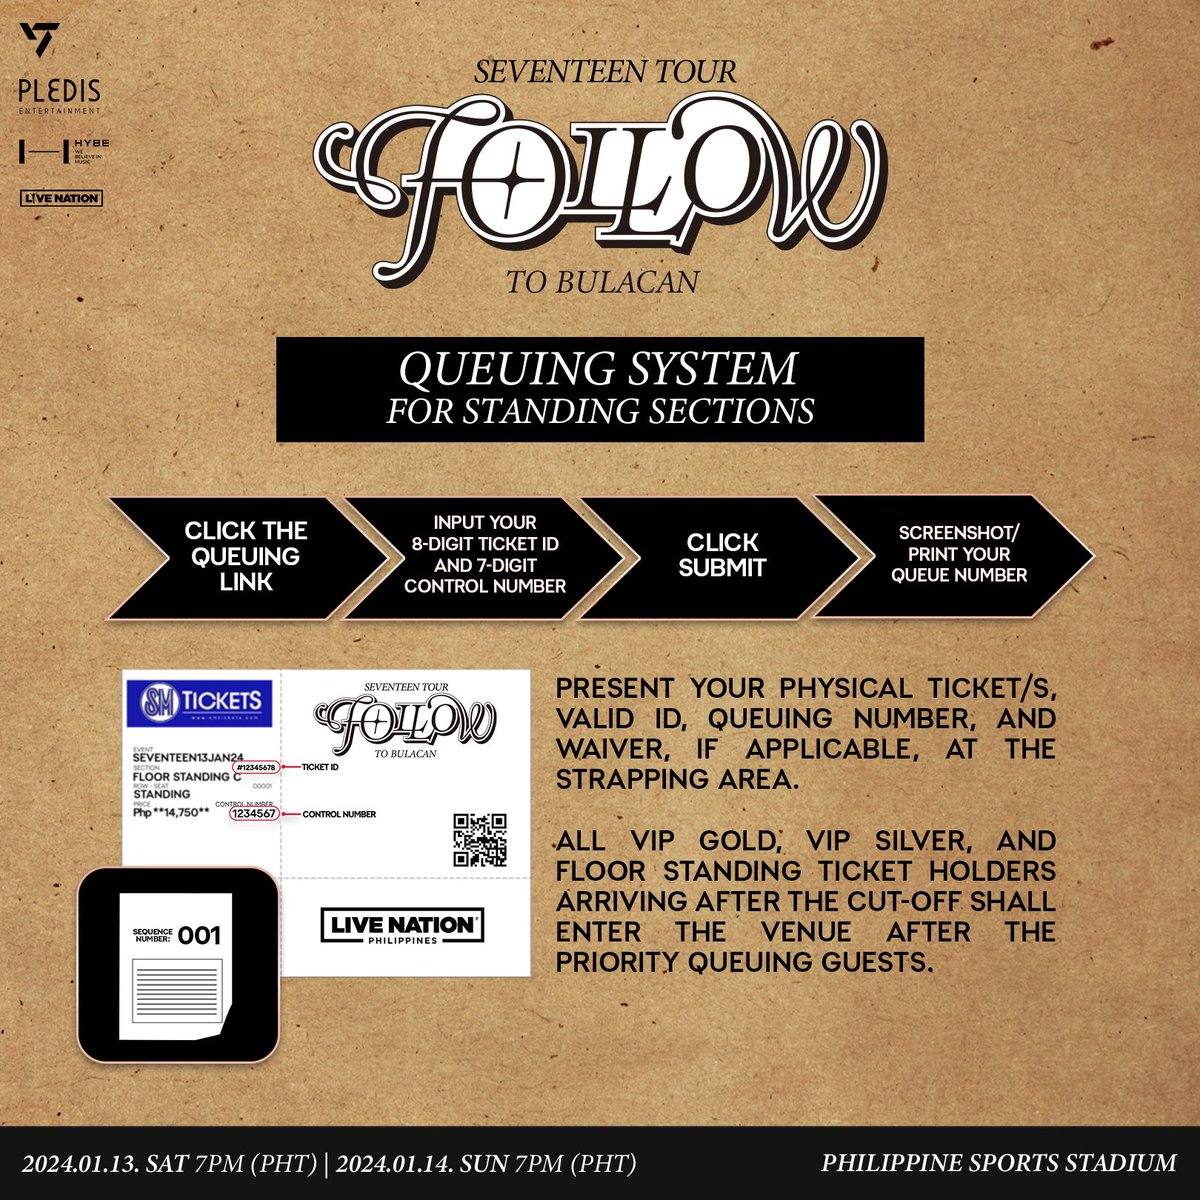 Check out the queuing system for SEVENTEEN TOUR ‘FOLLOW’ TO BULACAN happening on January 13 and 14 at the Philippine Sports Stadium 🤍

Download your queuing number here:
January 13 - smtickets.com/v1/svtjan13
January 14 - smtickets.com/v1/svtjan14

#SEVENTEEN #세븐틴